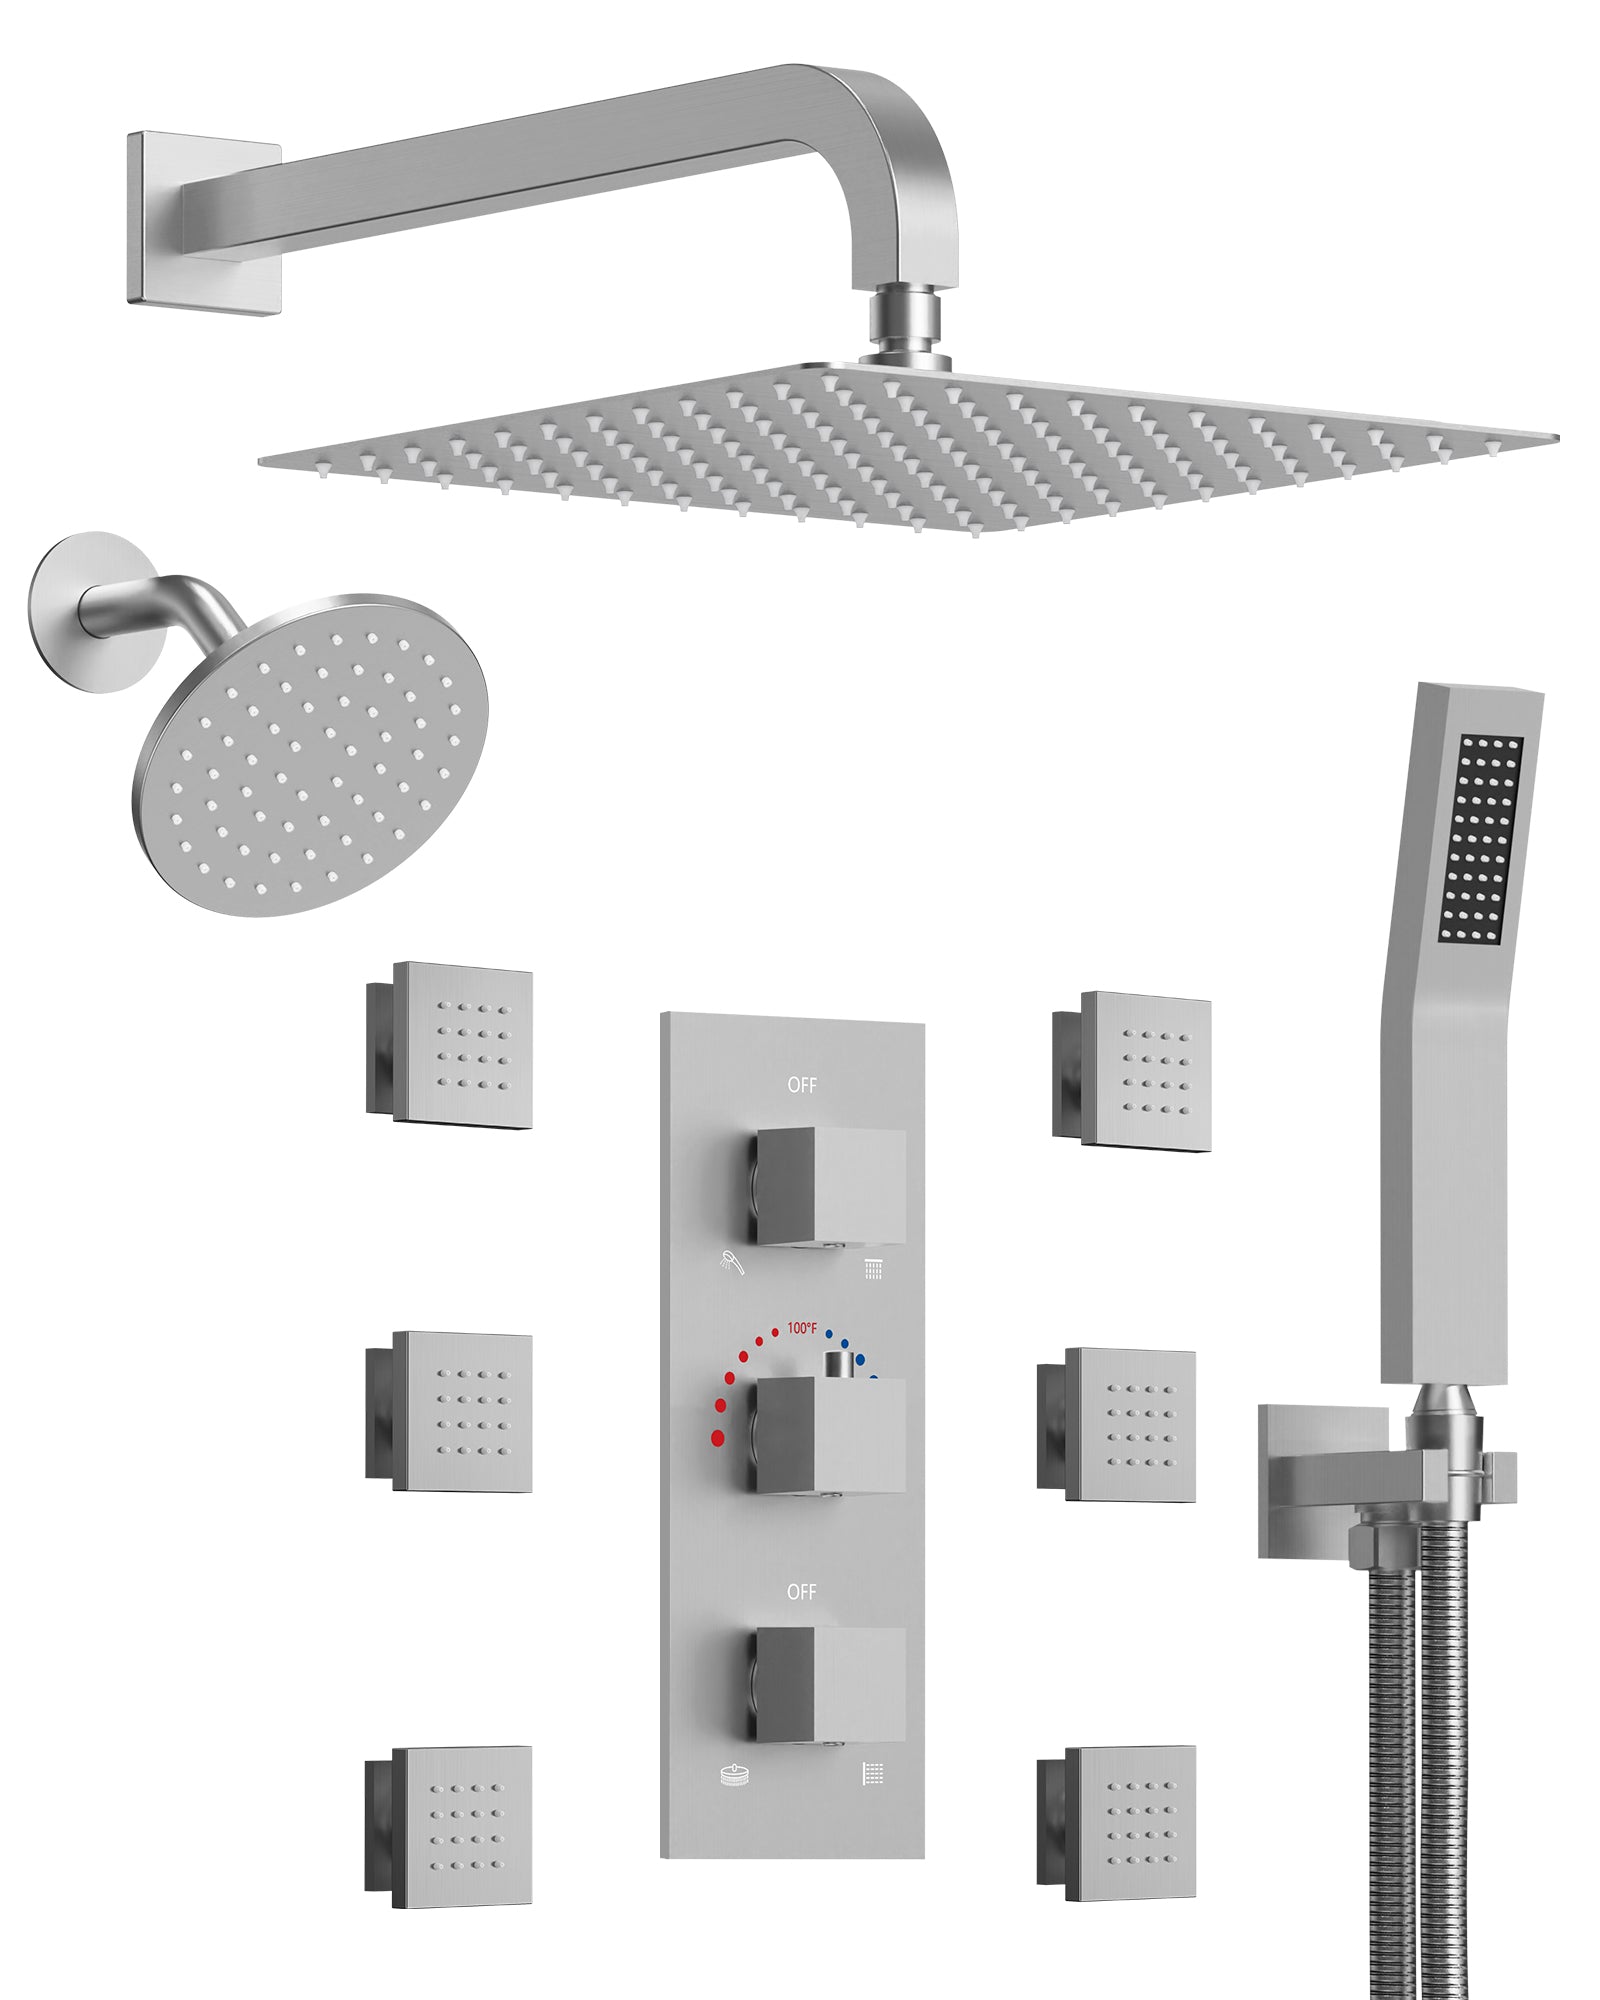 EVERSTEIN Luxury Dual Shower Heads Set with 12" Square Ceiling Rainfall & Adjustable Body Massage Jets - 8 Spray Patterns Combo